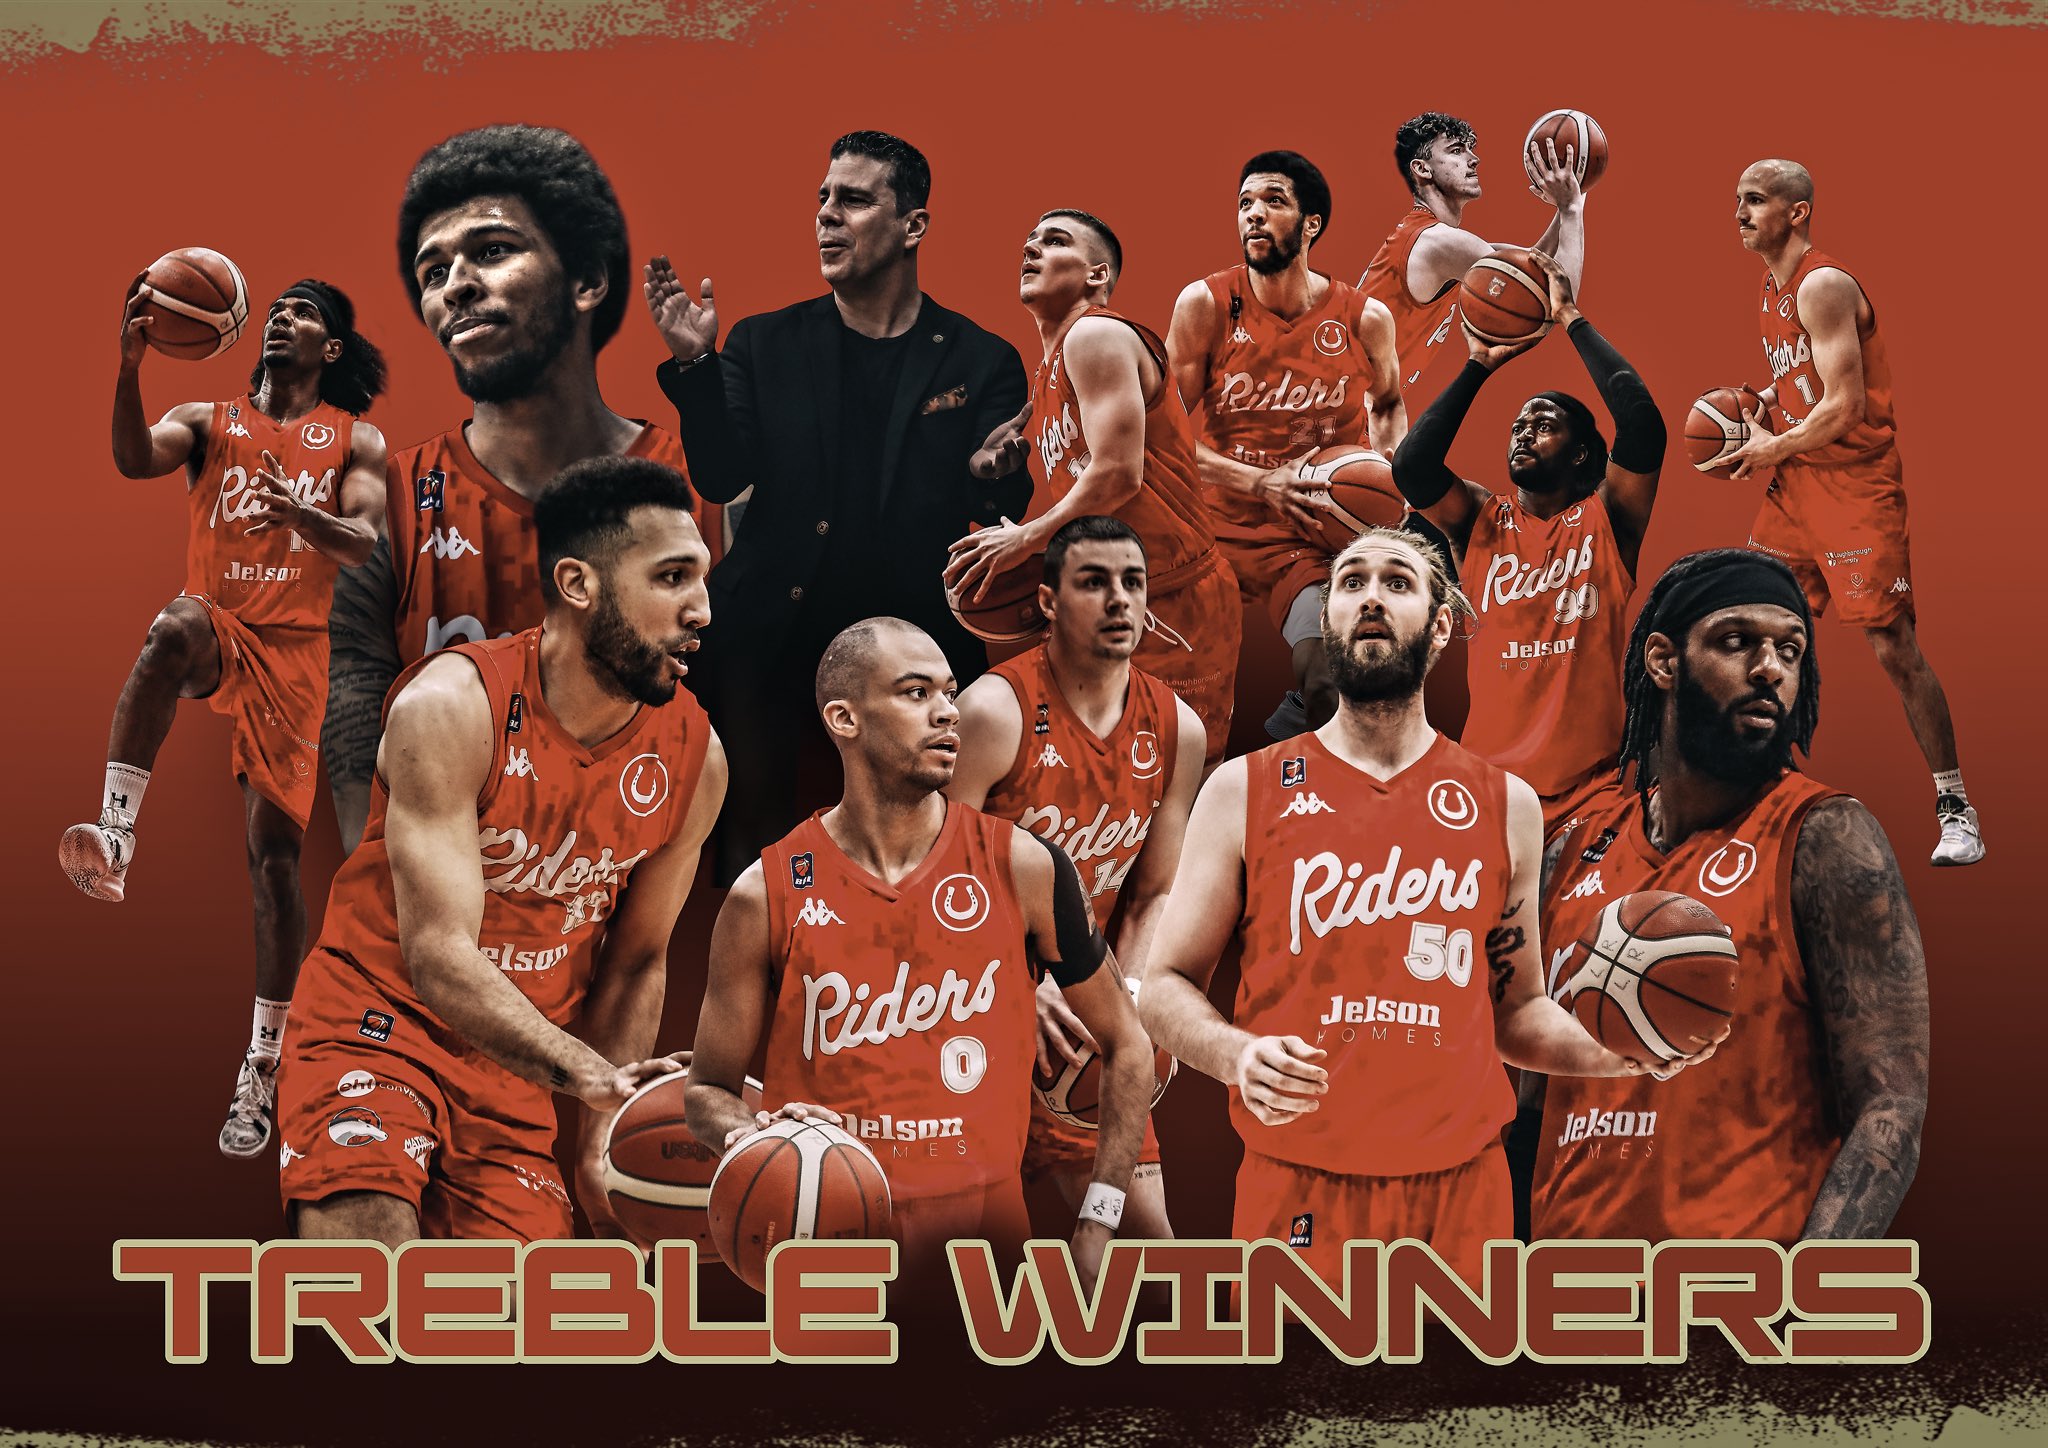 Riders win BBL Playoff Final!